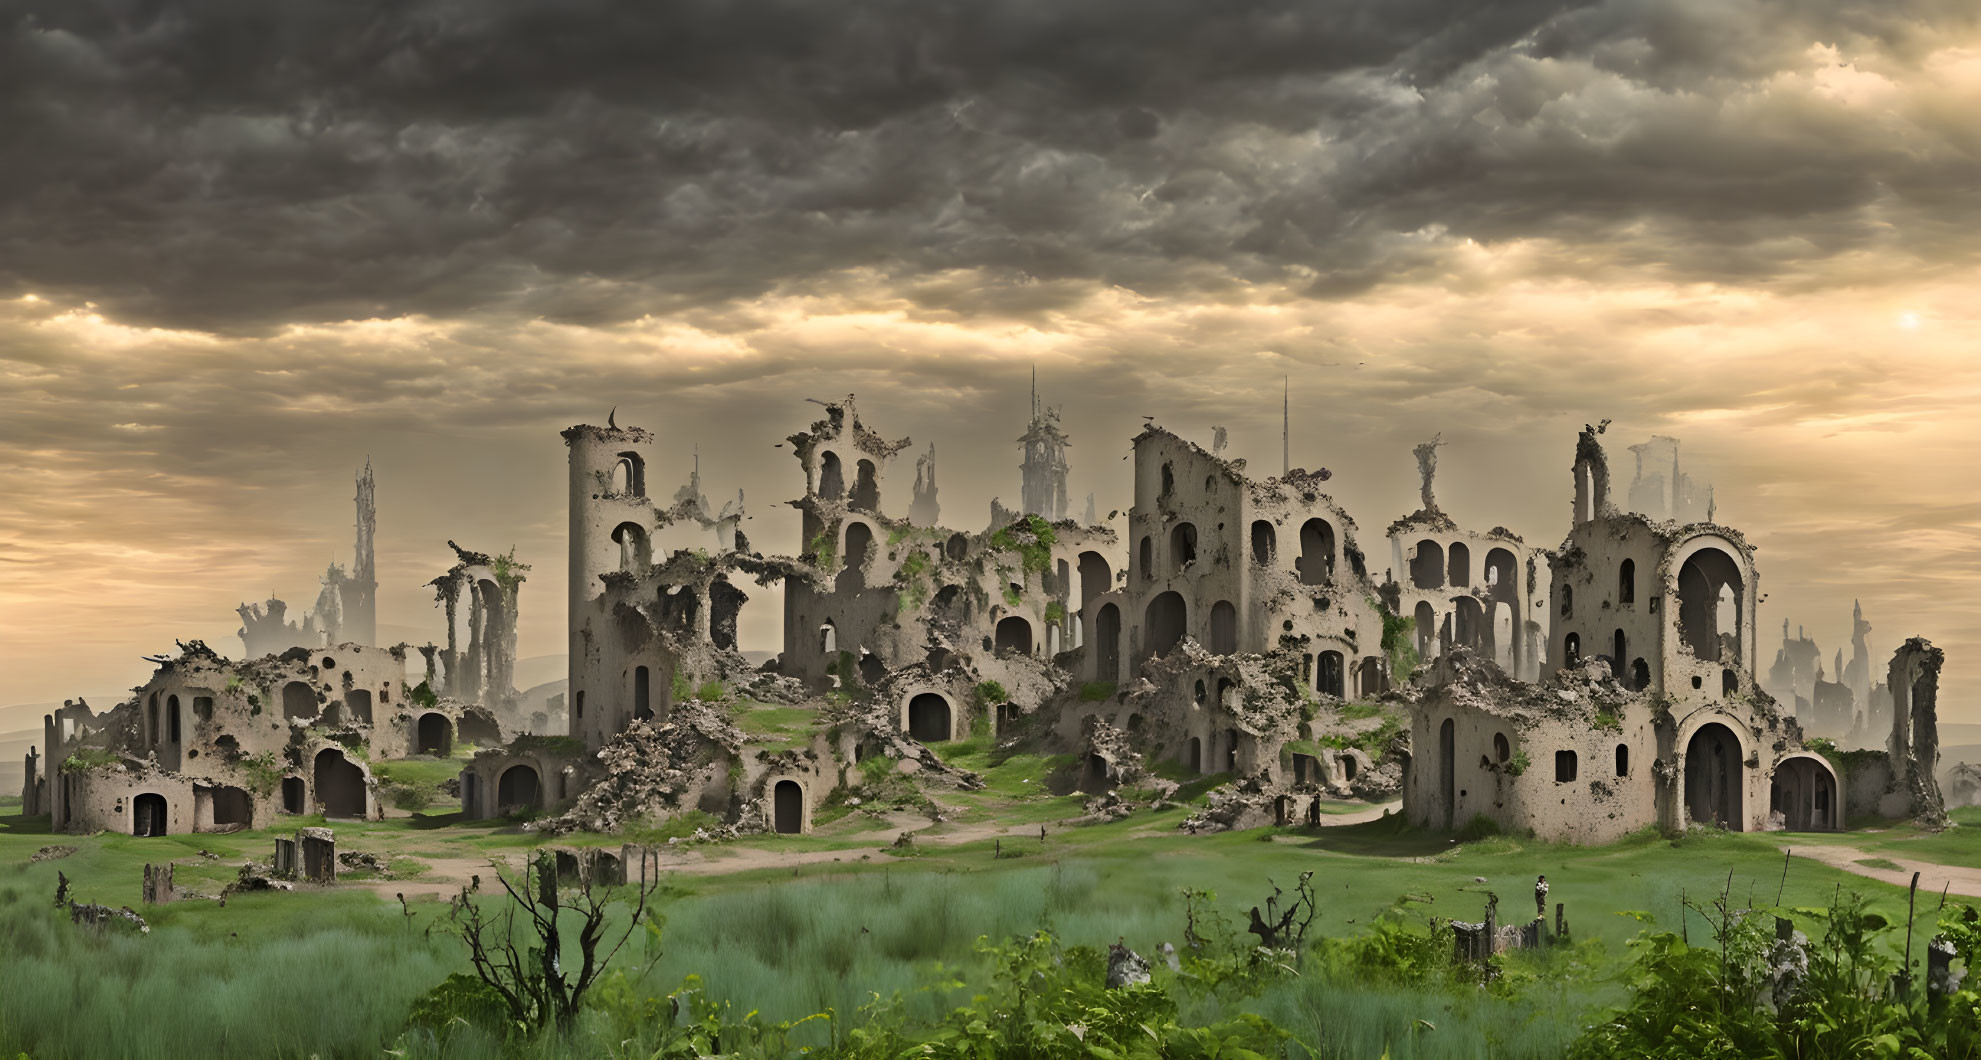 Desolate landscape with ruins under dramatic sky at dusk or dawn